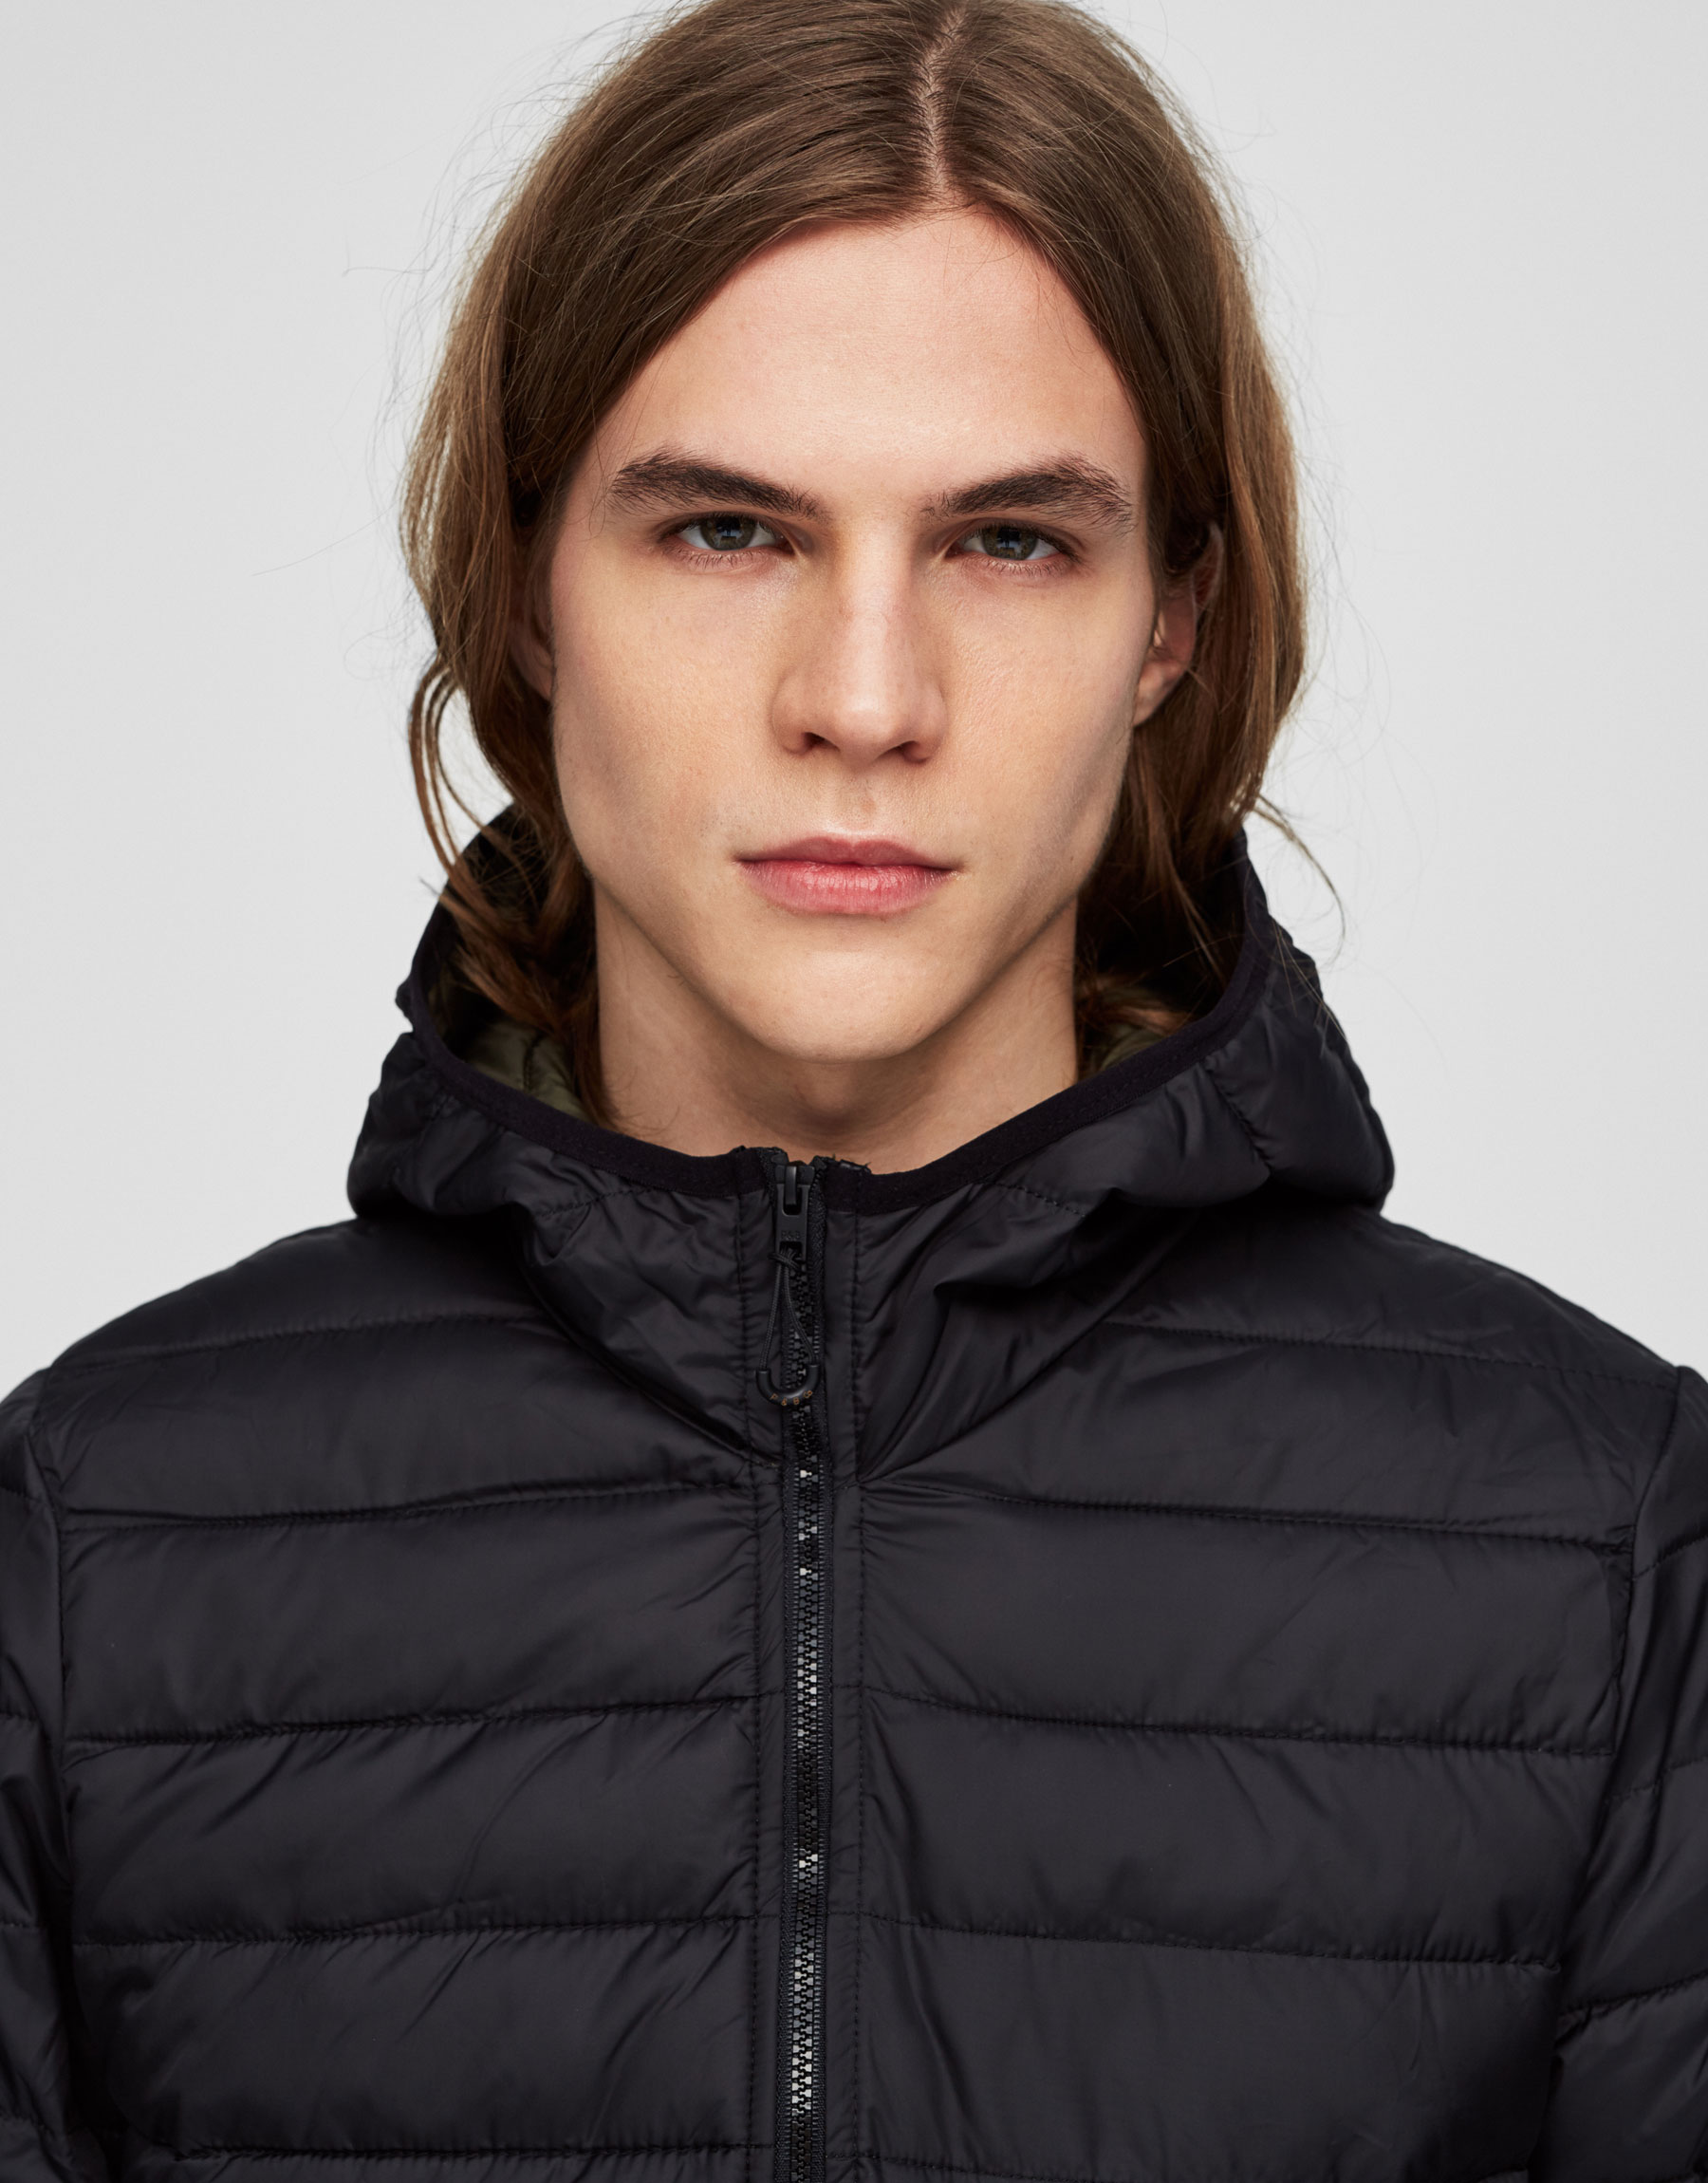 Men's Coats and Jackets - Pre-Autumn Collection 2017 | PULL&BEAR